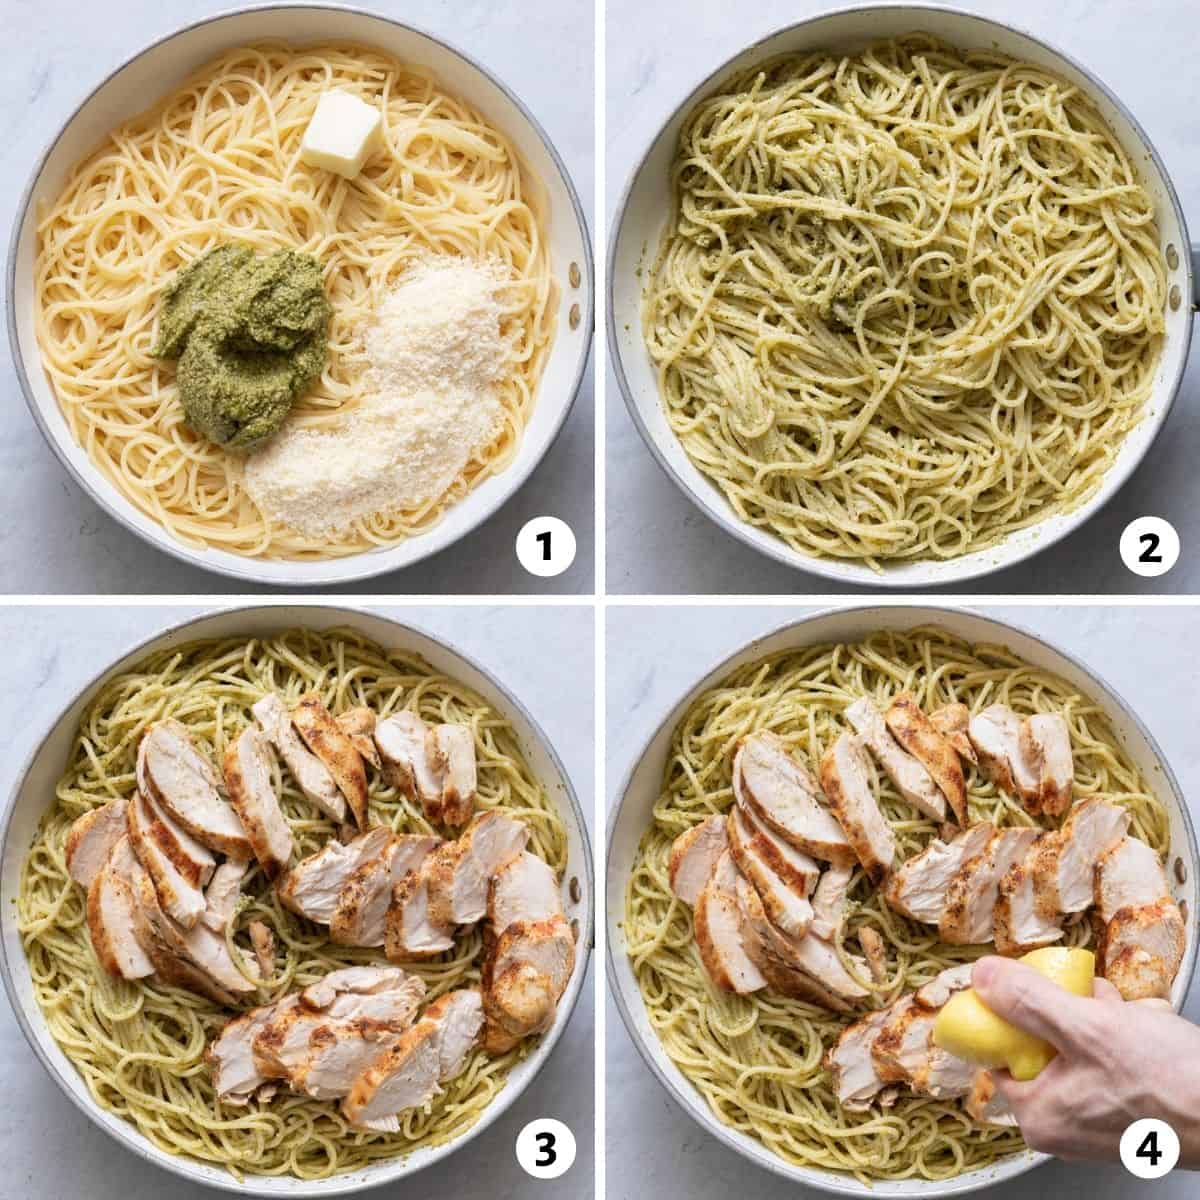 Pesto sauce tossed with linguine pasta in a pot on the left with grilled chicken pieces cut up on the right